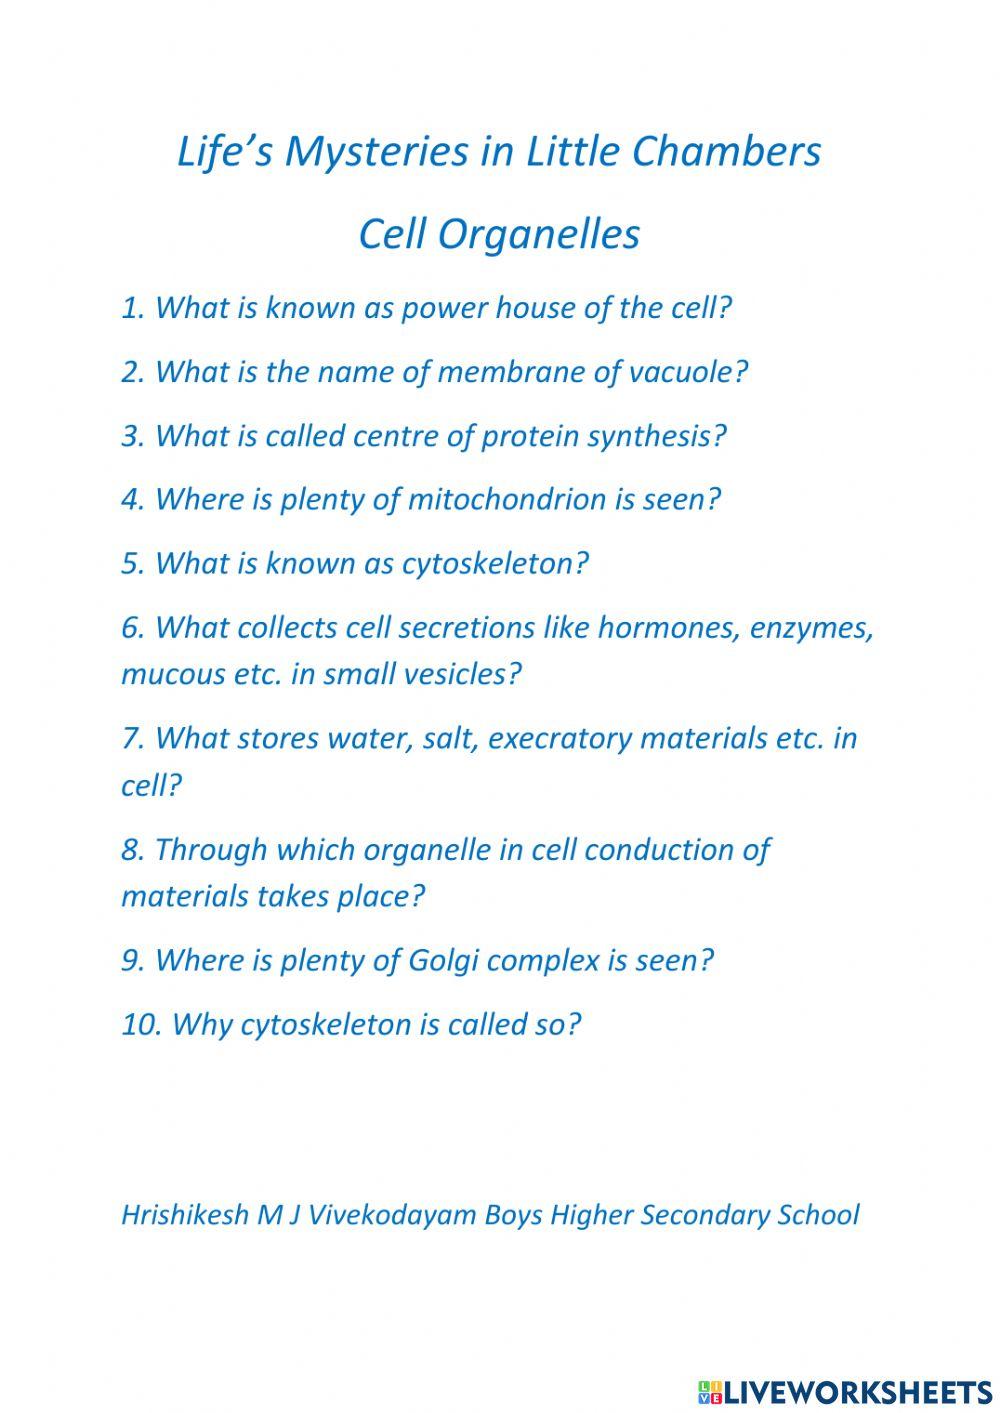 Organelles of Cell